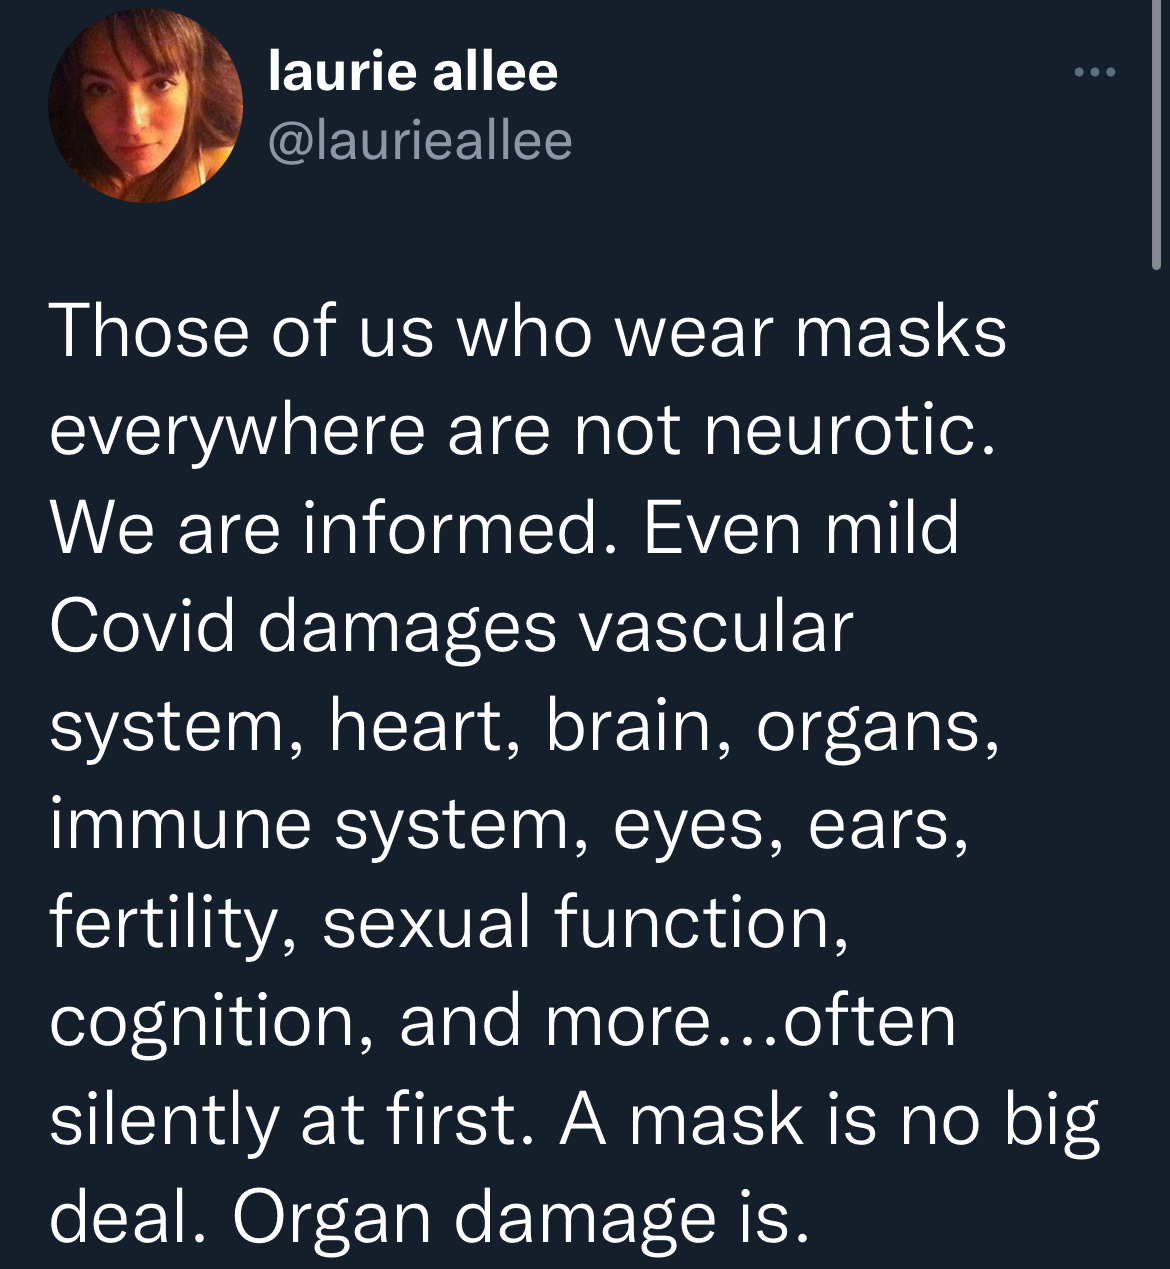 tweet by @laurieallee “Those of us who wear masks everywhere are not neurotic. We are informed. Even mild Covid damages vascular system, heart, brain, organs, immune system, eyes, ears, fertility, sexual function, cognition, and more… often silently at first. A mask is no big deal. Organ damage is.”